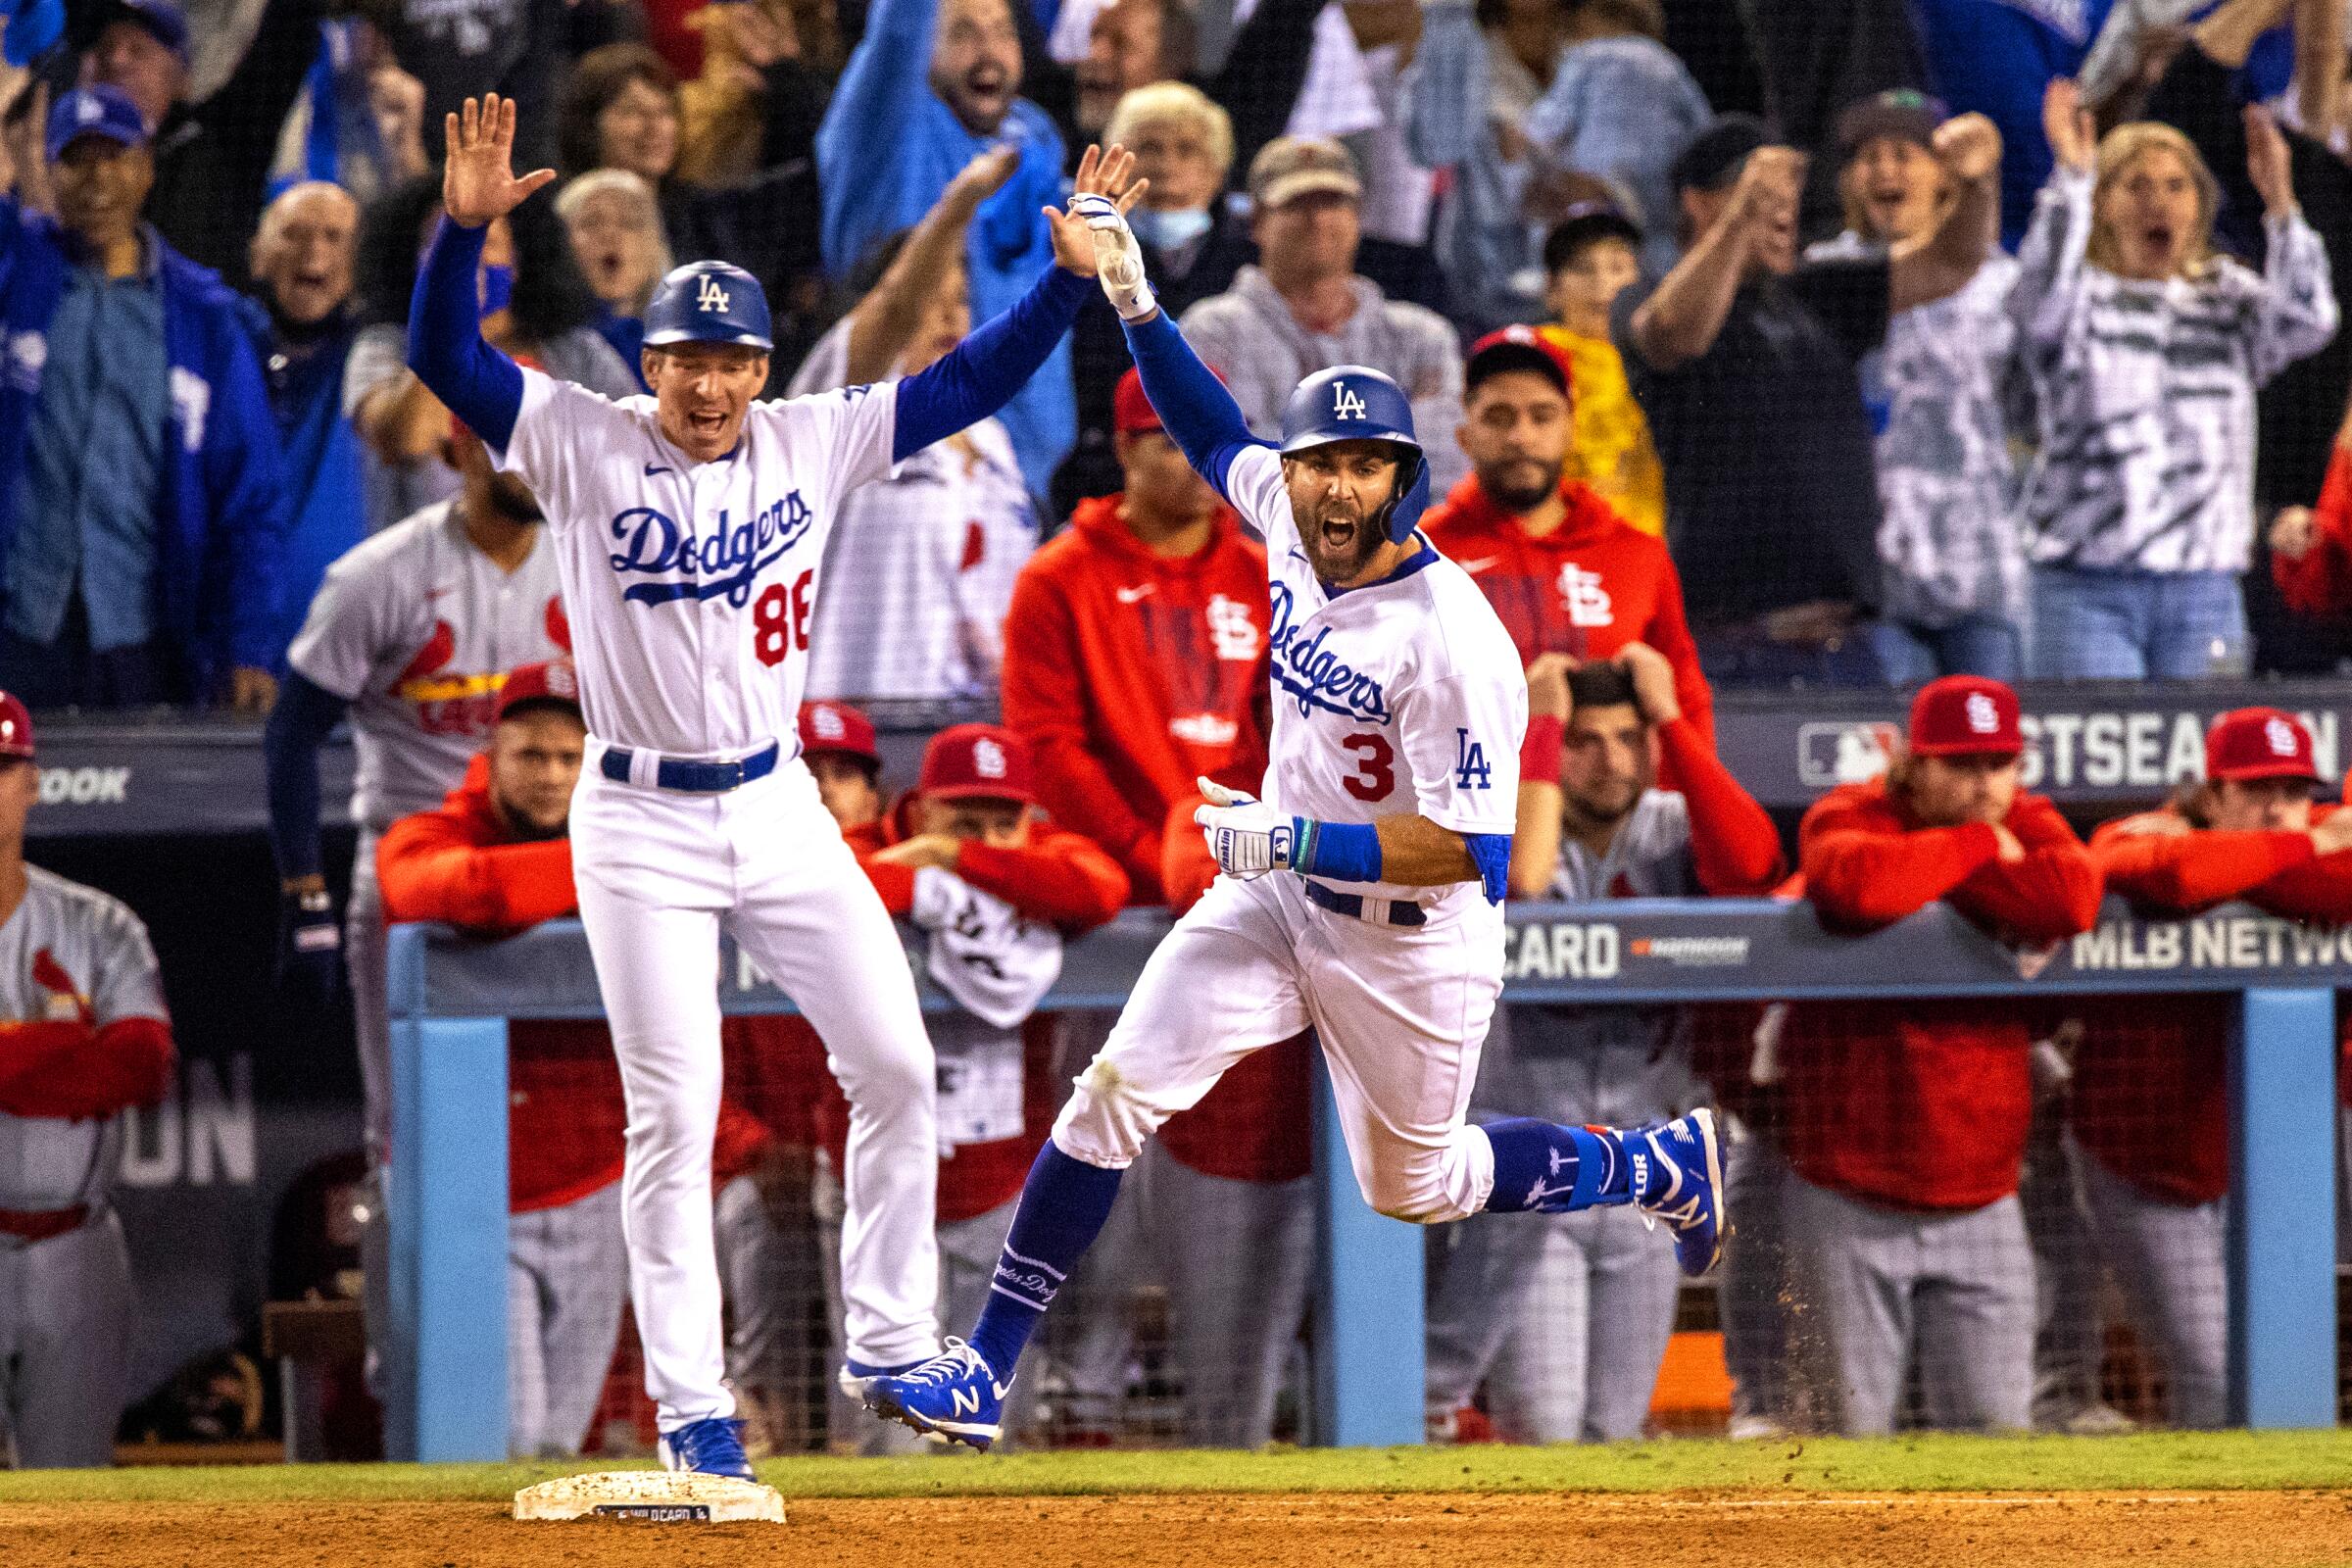 Dodgers left fielder Chris Taylor reacts while running the bases after his two-run homer wins the game.